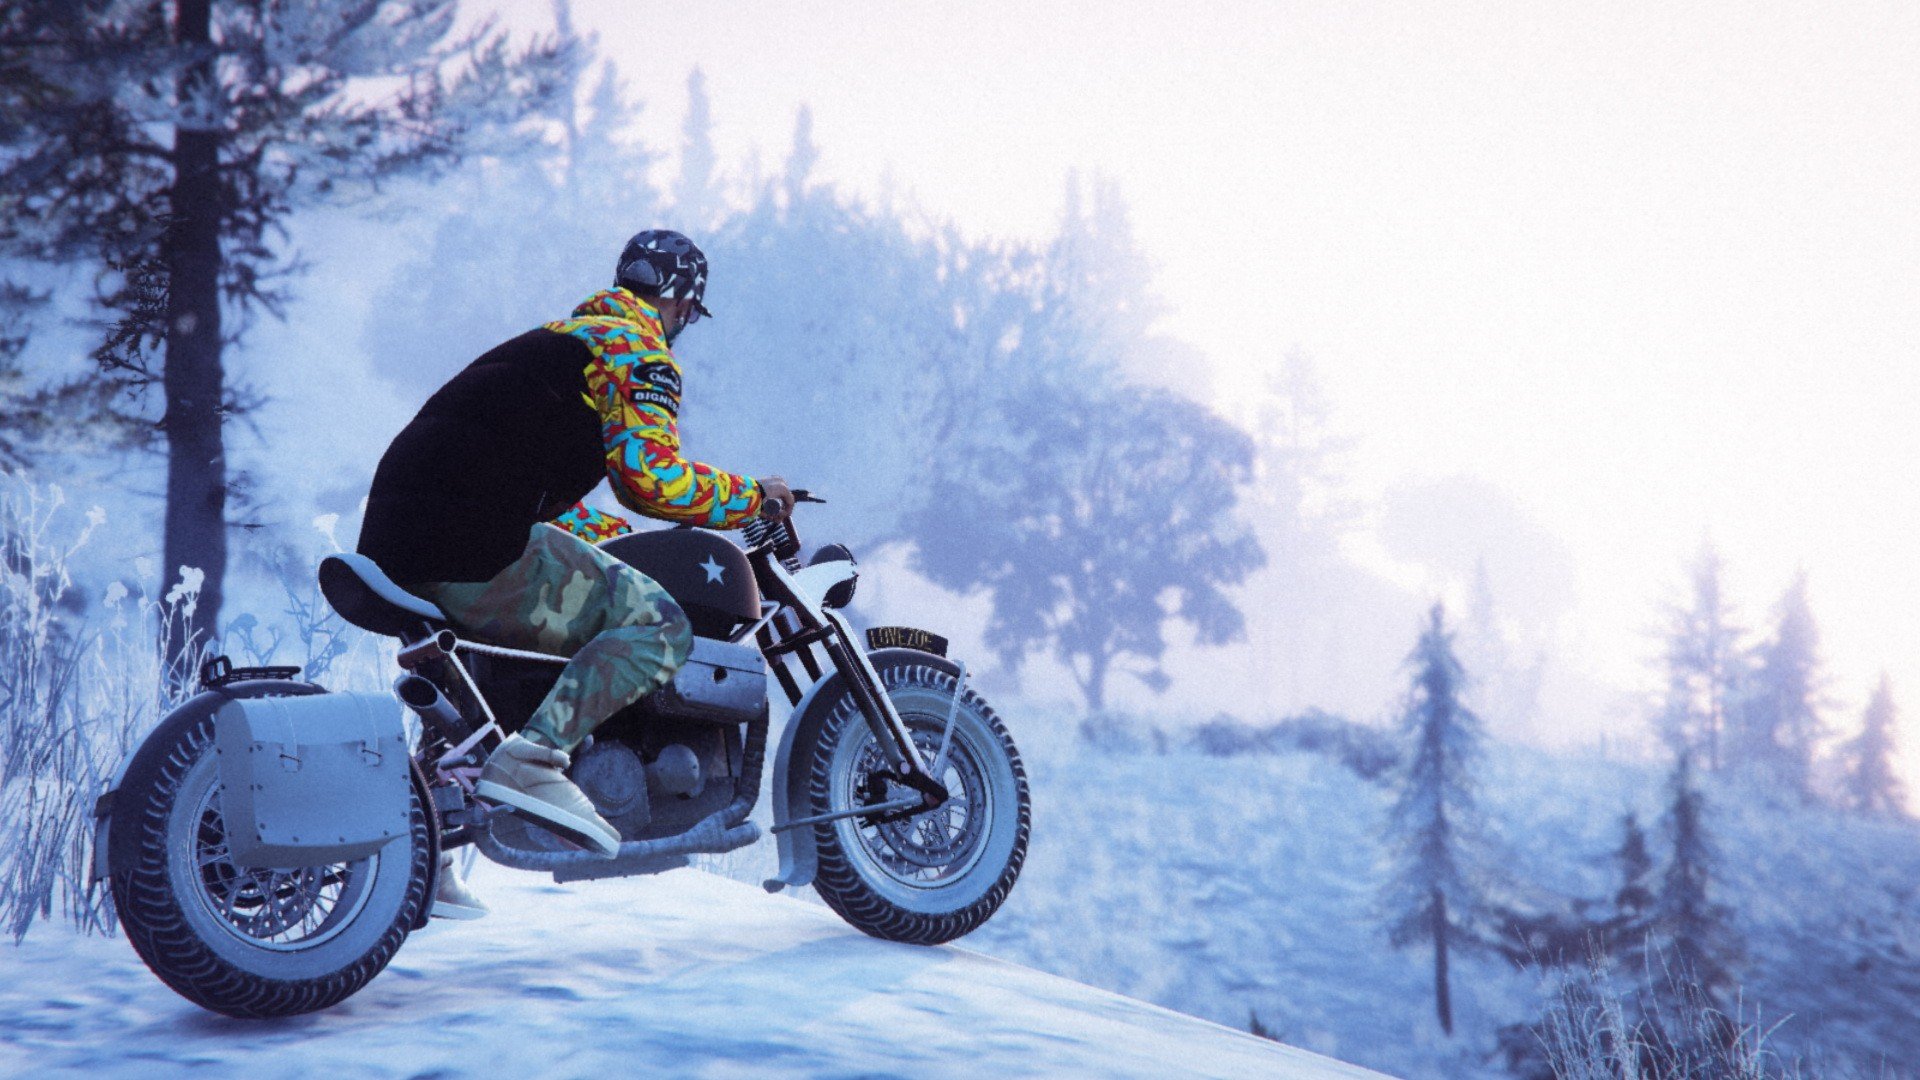 Grand Theft Auto V, Grand Theft Auto Online, Rockstar Games, Motorcycle, Snow Wallpaper